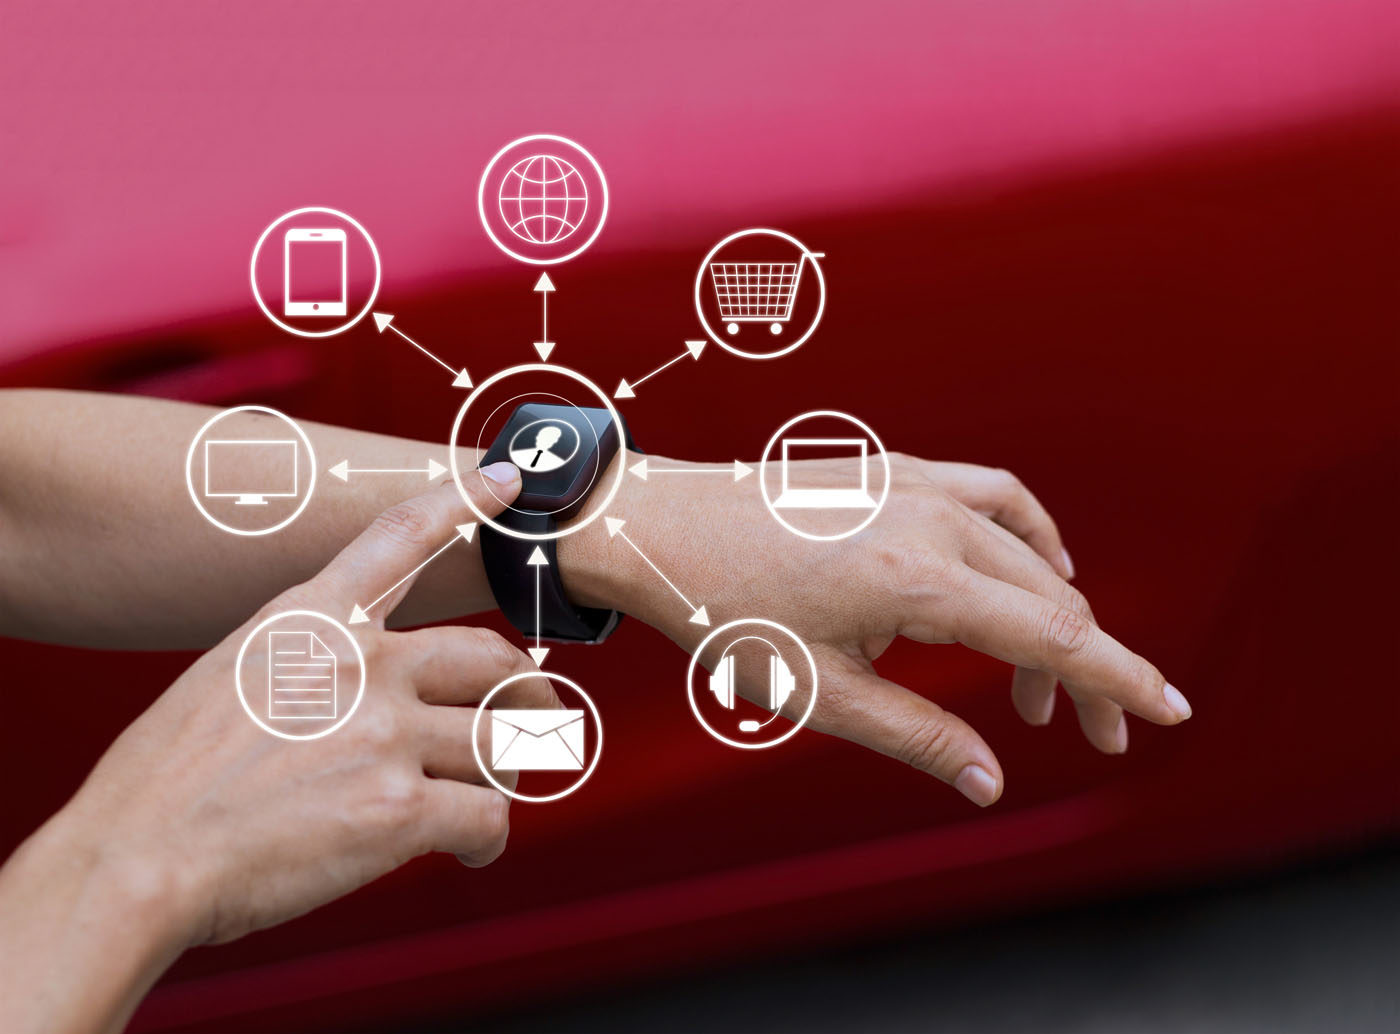 Image showing watch connected to different types of personal technology, from photographer ipopba on iStock.